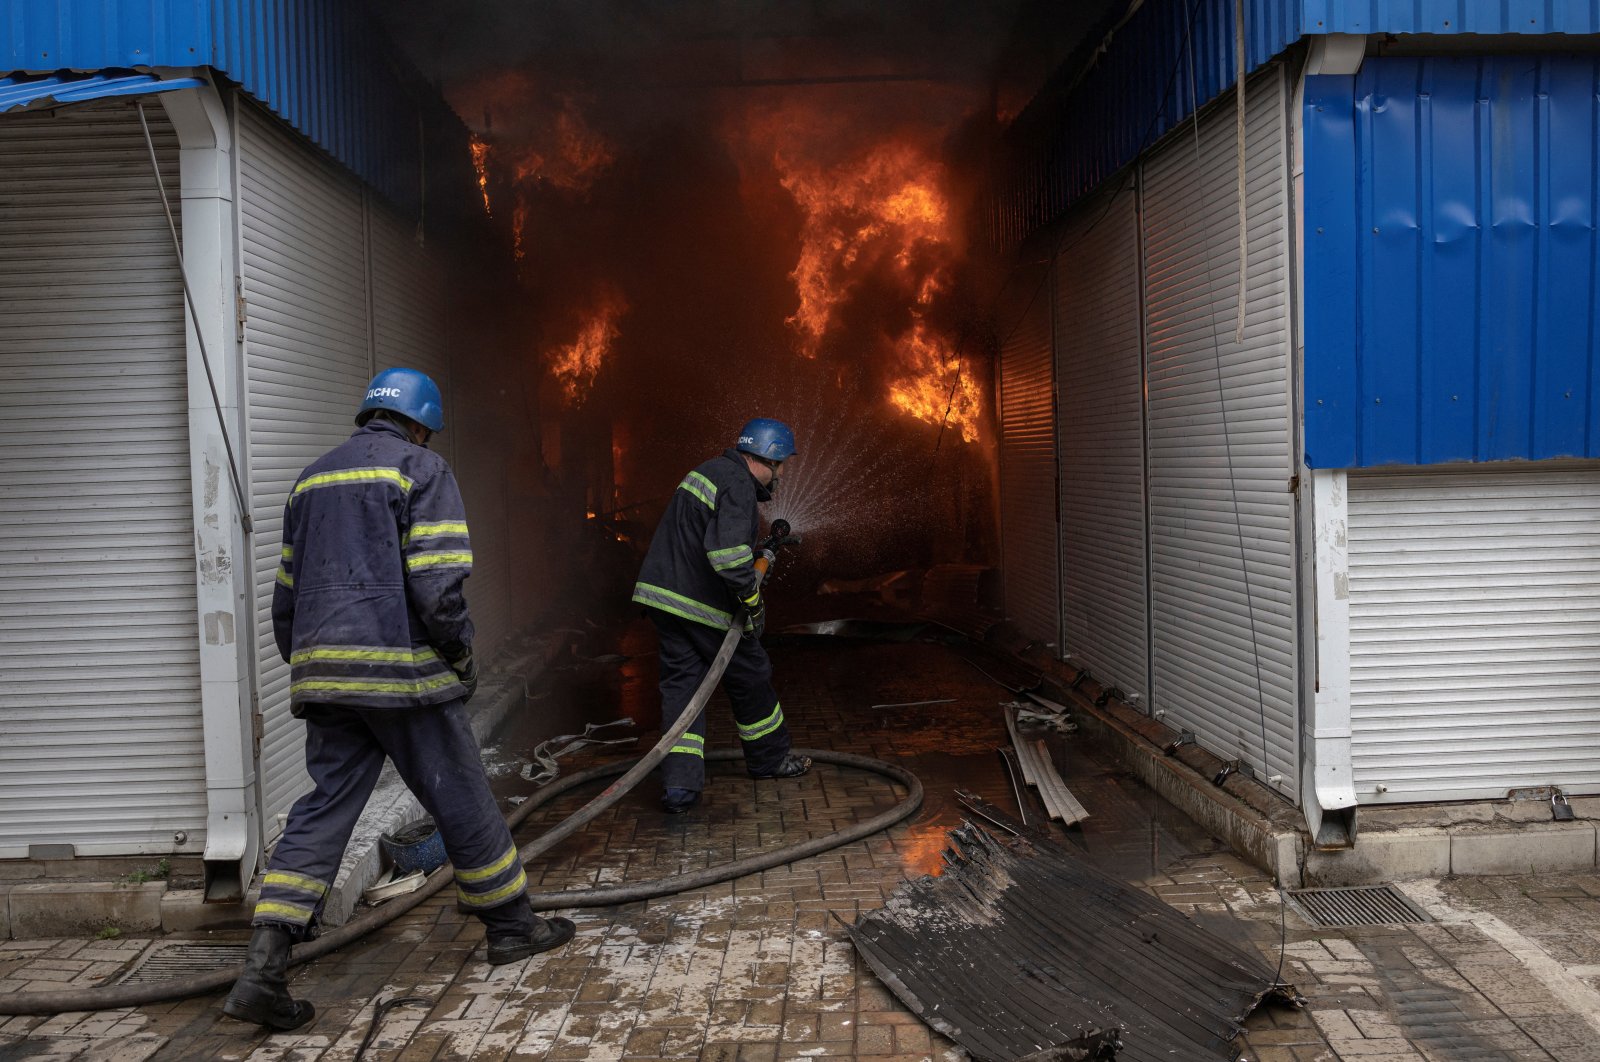 Firefighters spray water onto a fire at the market after shelling in Sloviansk, Donetsk region, Ukraine, July 5, 2022. (Reuters Photo)